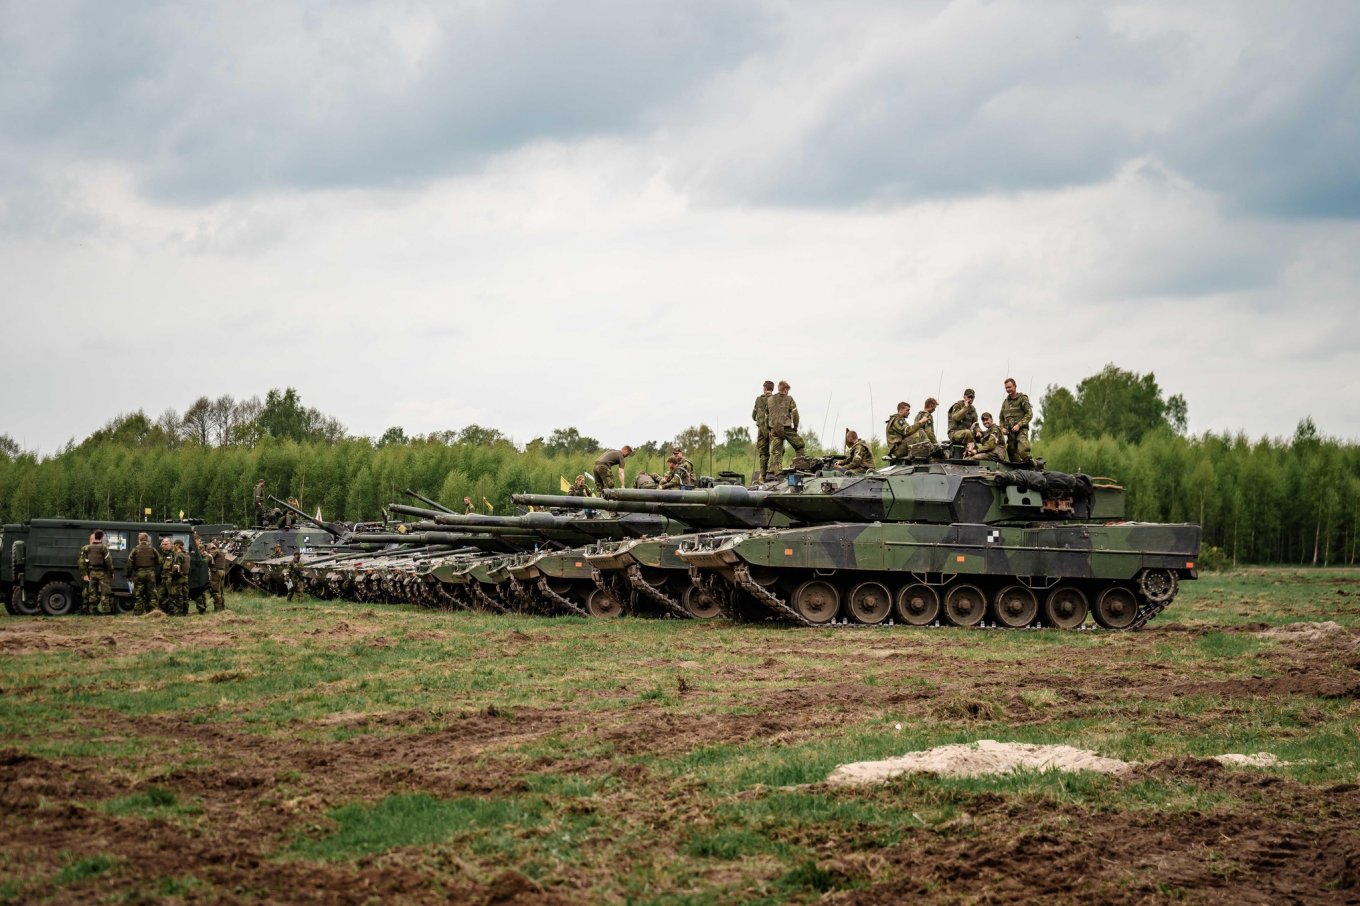 The Stridsvagn 122 tanks Defense Express Sweden Sends New Assistance Package for Ukraine, Including Parts for CV90 Vehicles and Leopard 2 Tanks, Proposes Missile Purchase by the U.S. for Ukraine